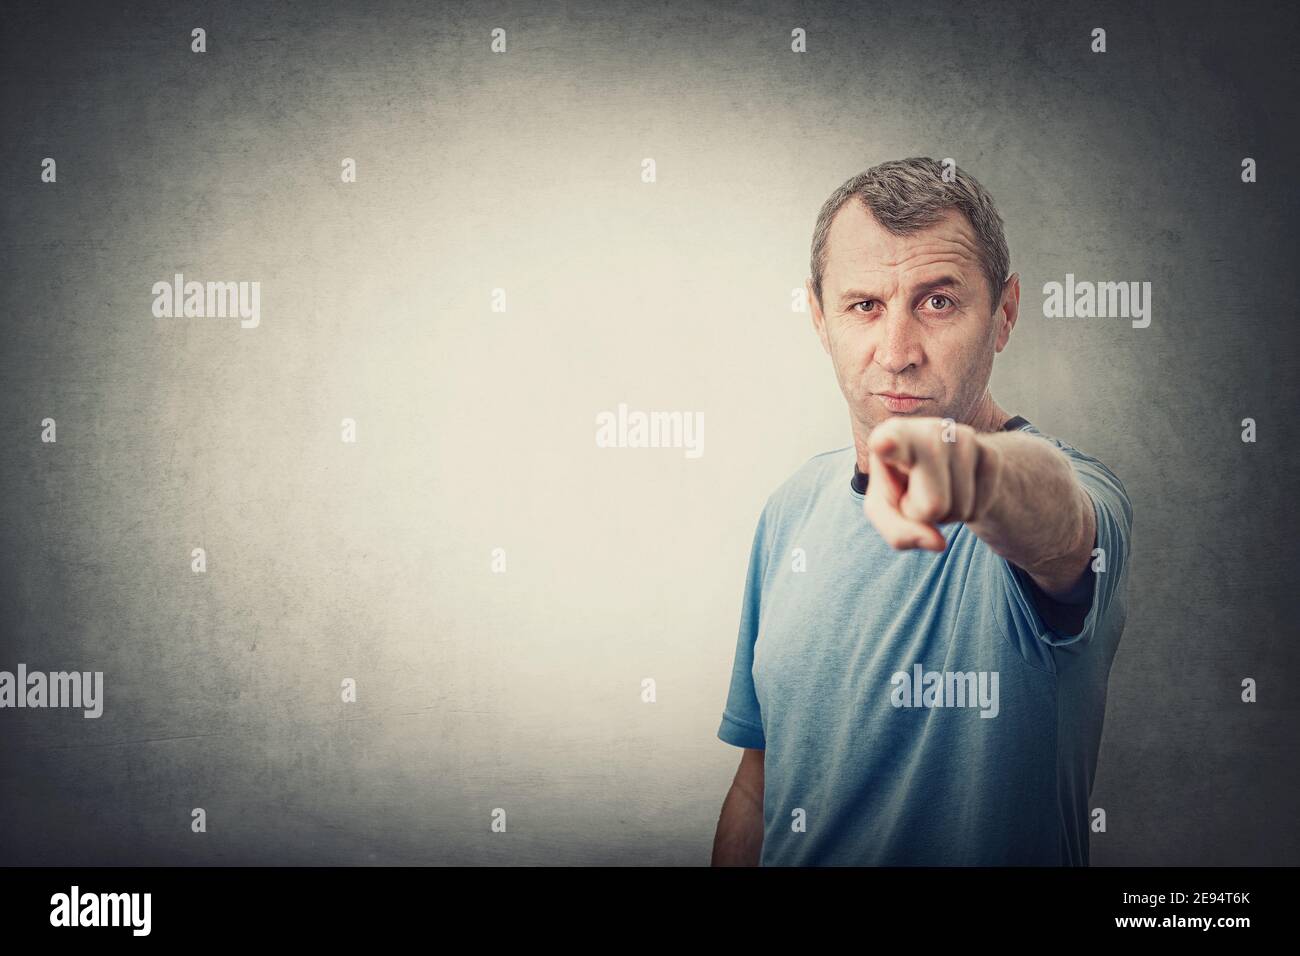 Confident and determined middle age man pointing index finger to camera, like blaming or accuse someone, isolated on grey wall background with copy sp Stock Photo